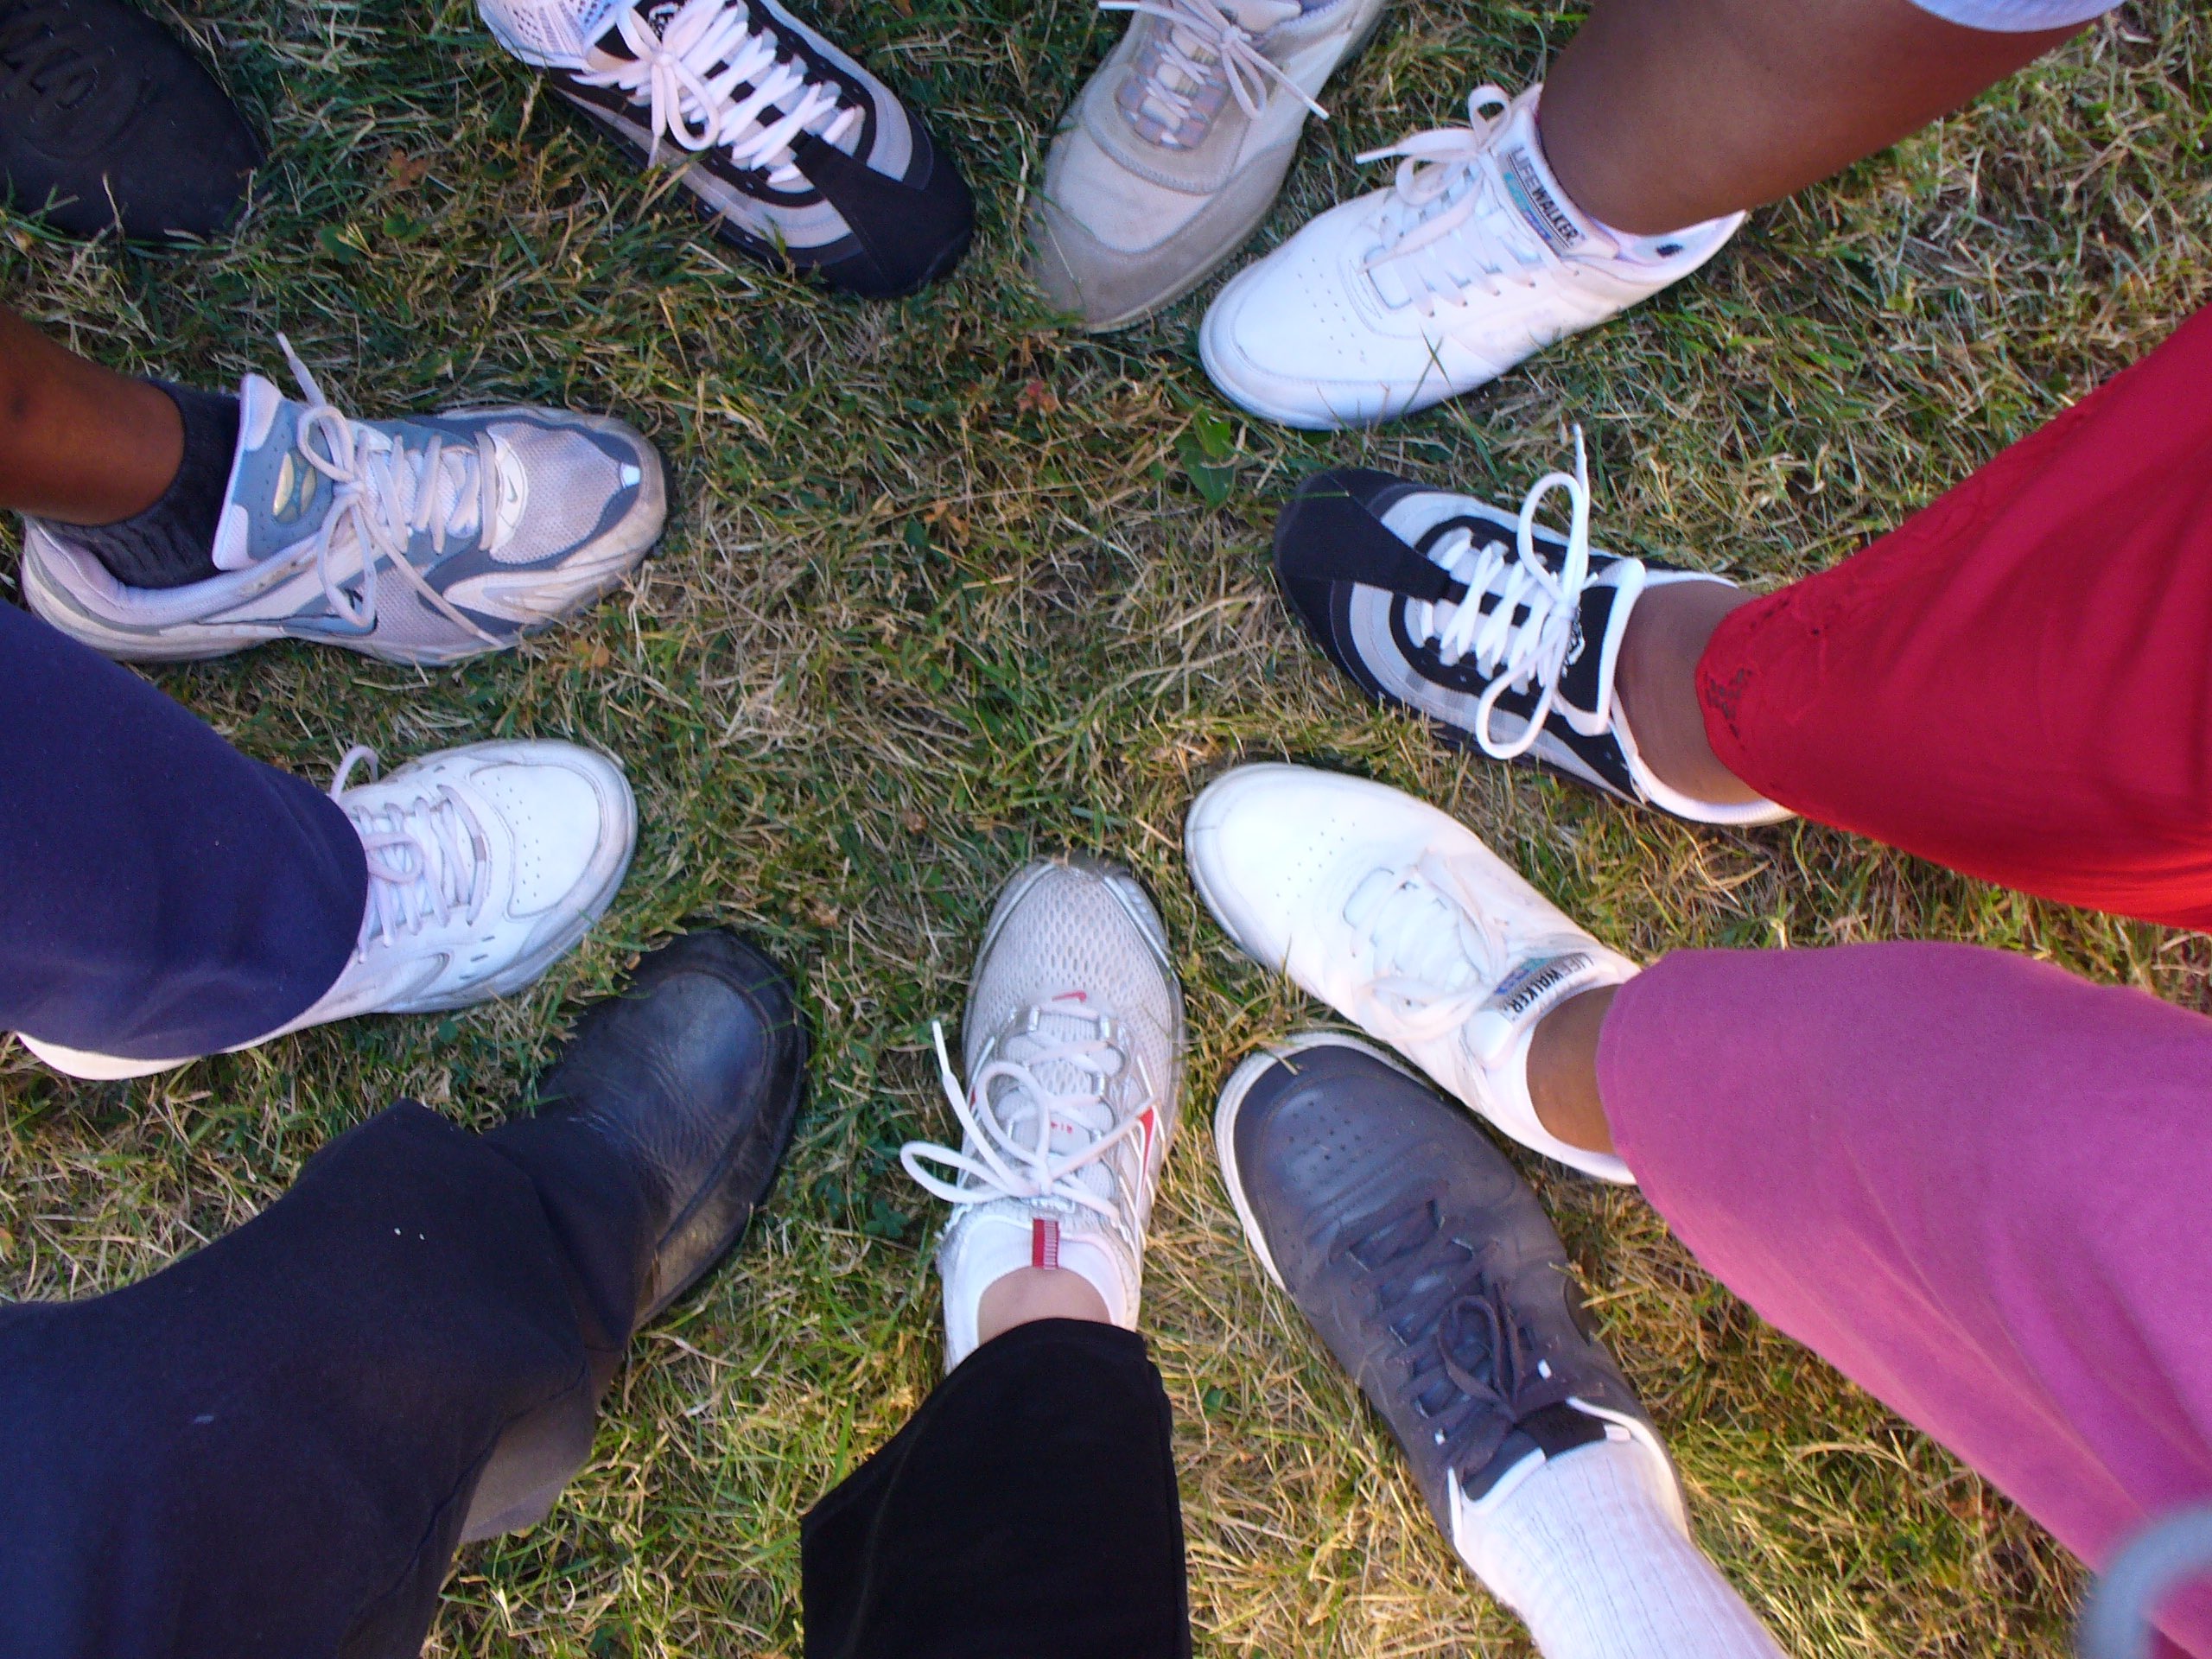 A group of people's feet forming a circle